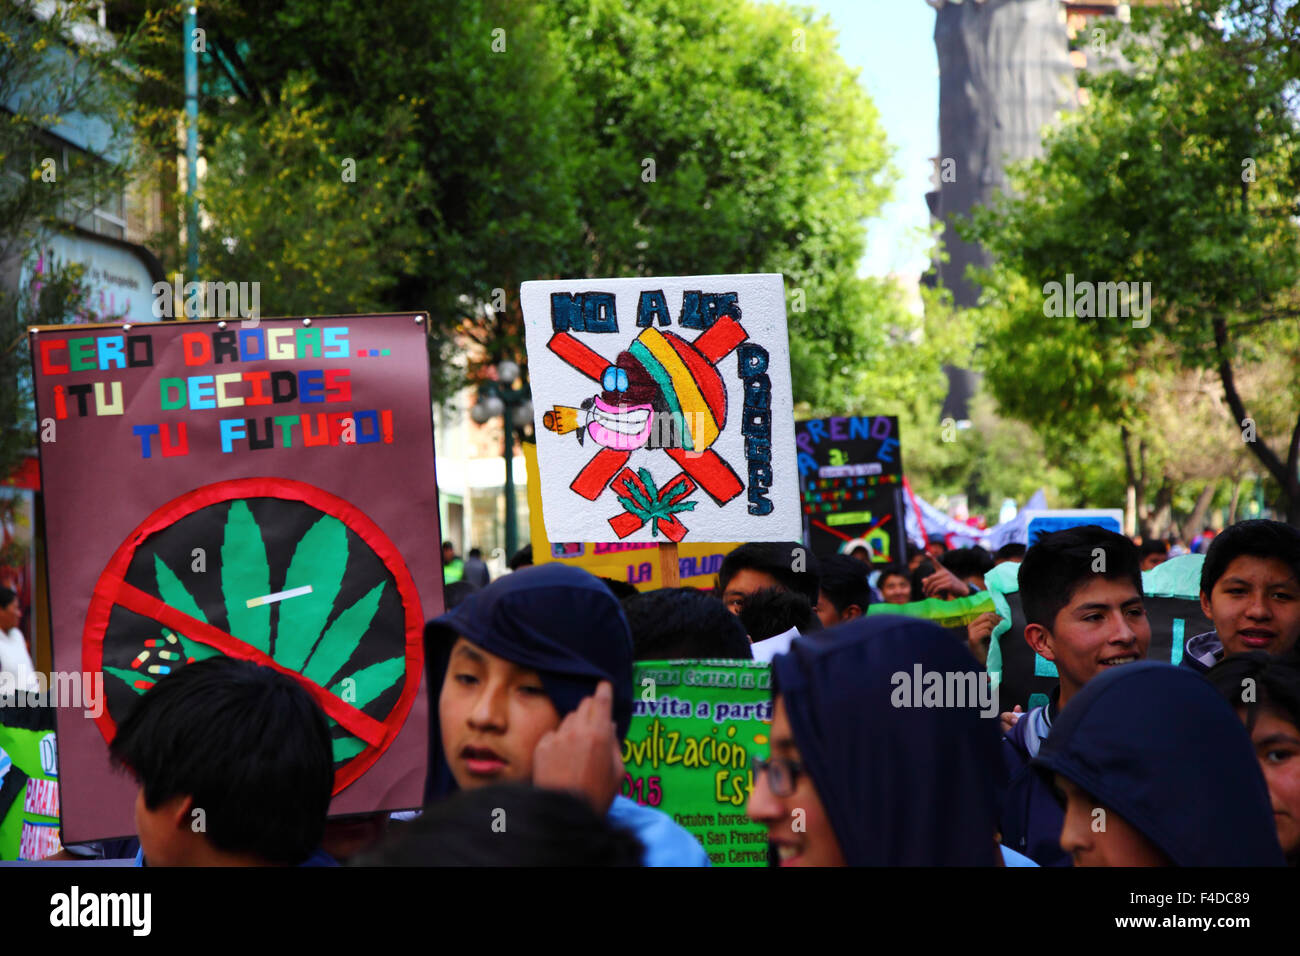 La Paz, Bolivia, 16th October 2015. Students carry placards discouraging drug use during a march through La Paz city centre warning of the dangers of drug use. The demonstration is organised every year by the police together with schools and colleges to educate and raise awareness about drugs and their dangers. Credit: James Brunker / Alamy Live News Stock Photo